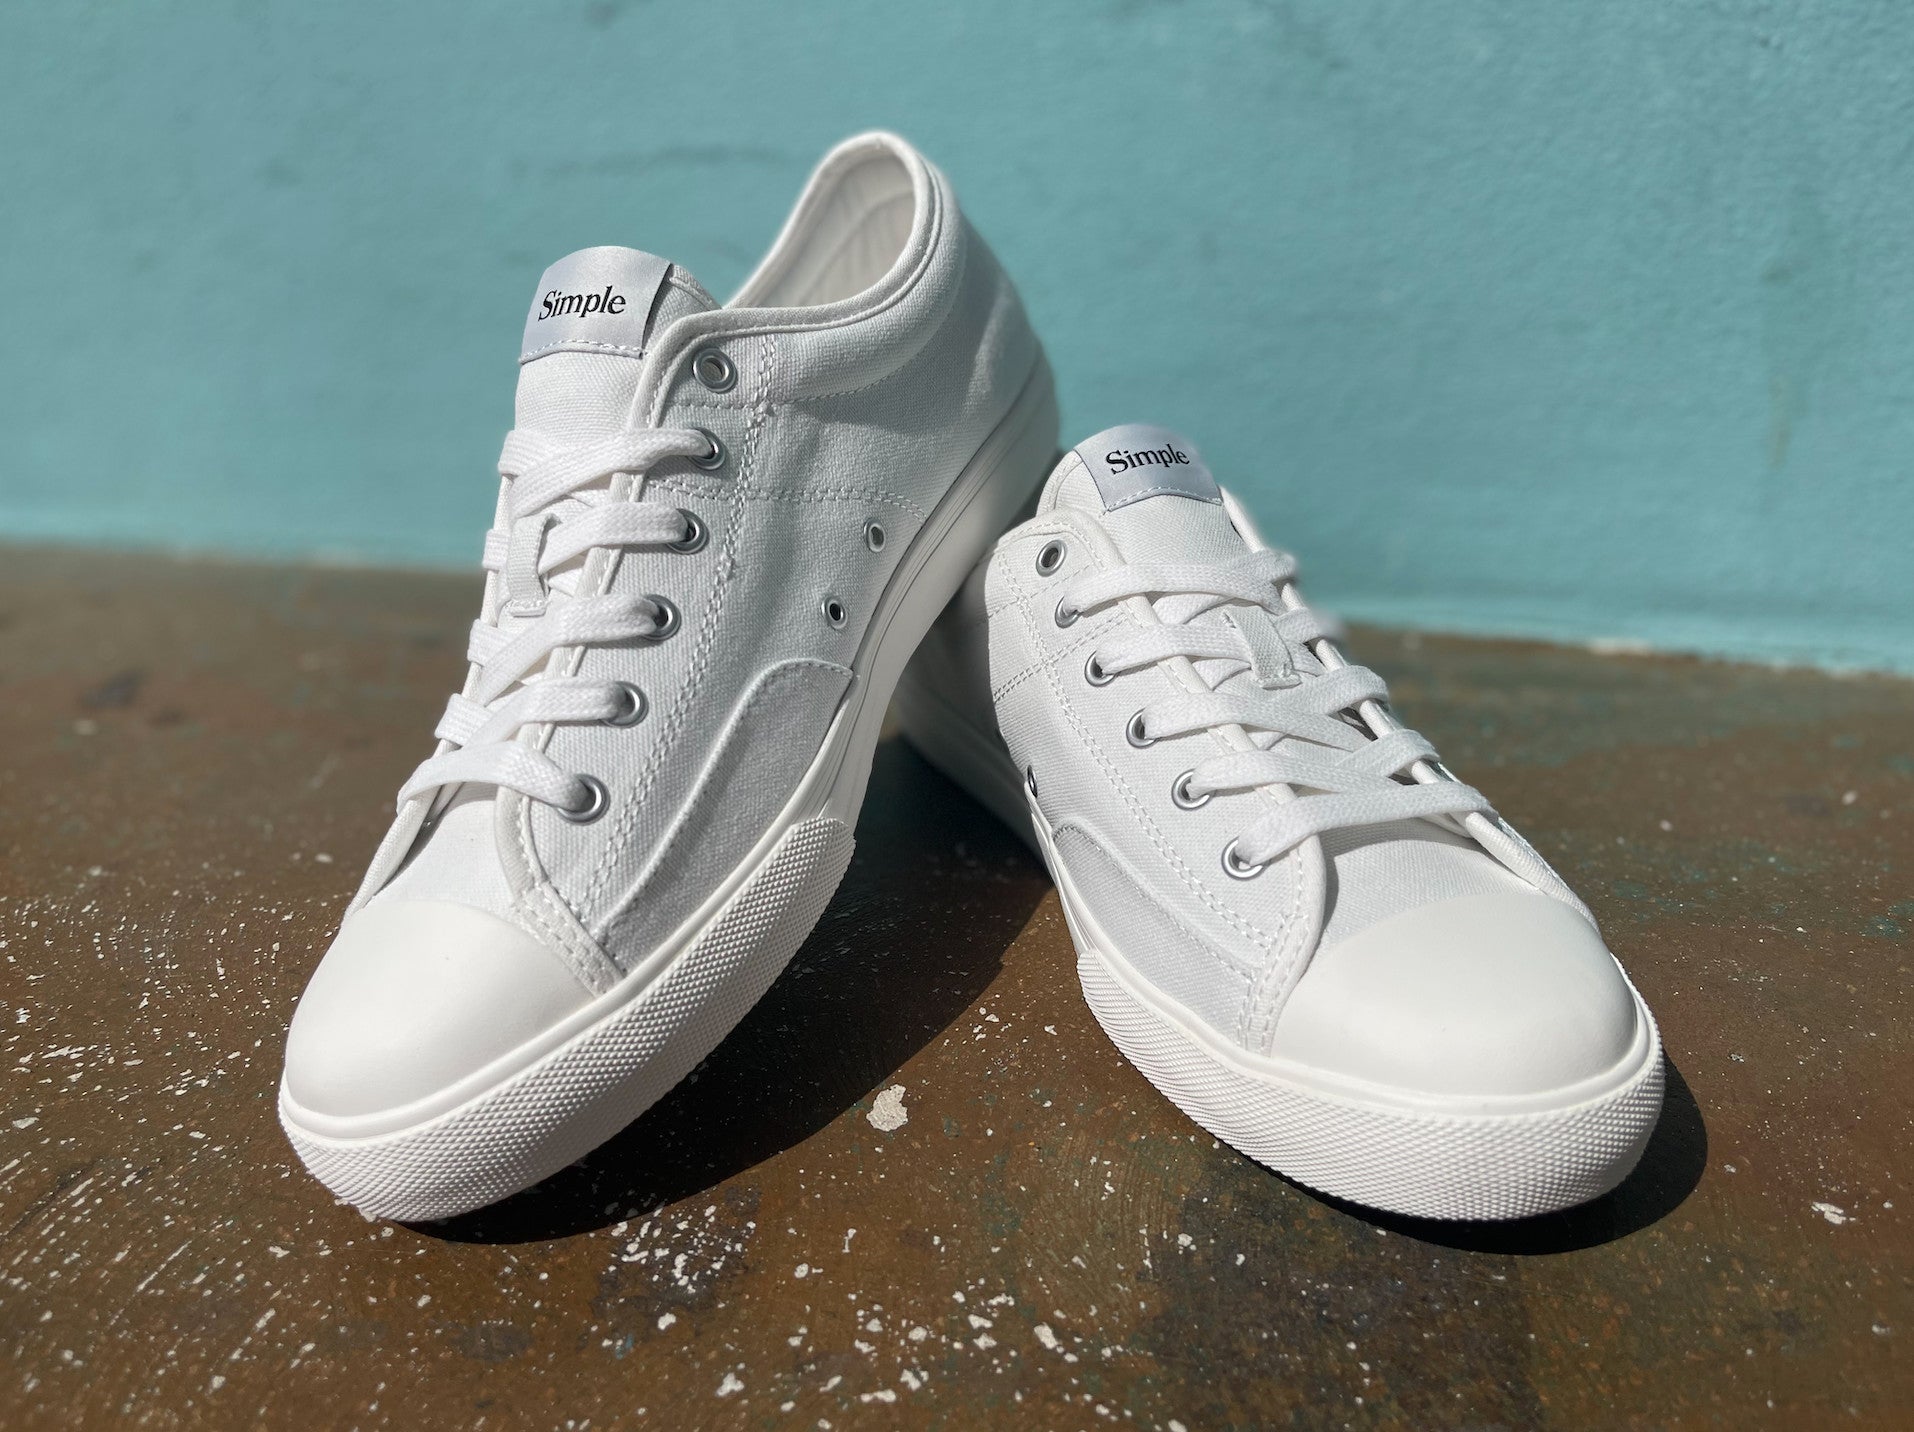 Simple S1 Shoes White 10